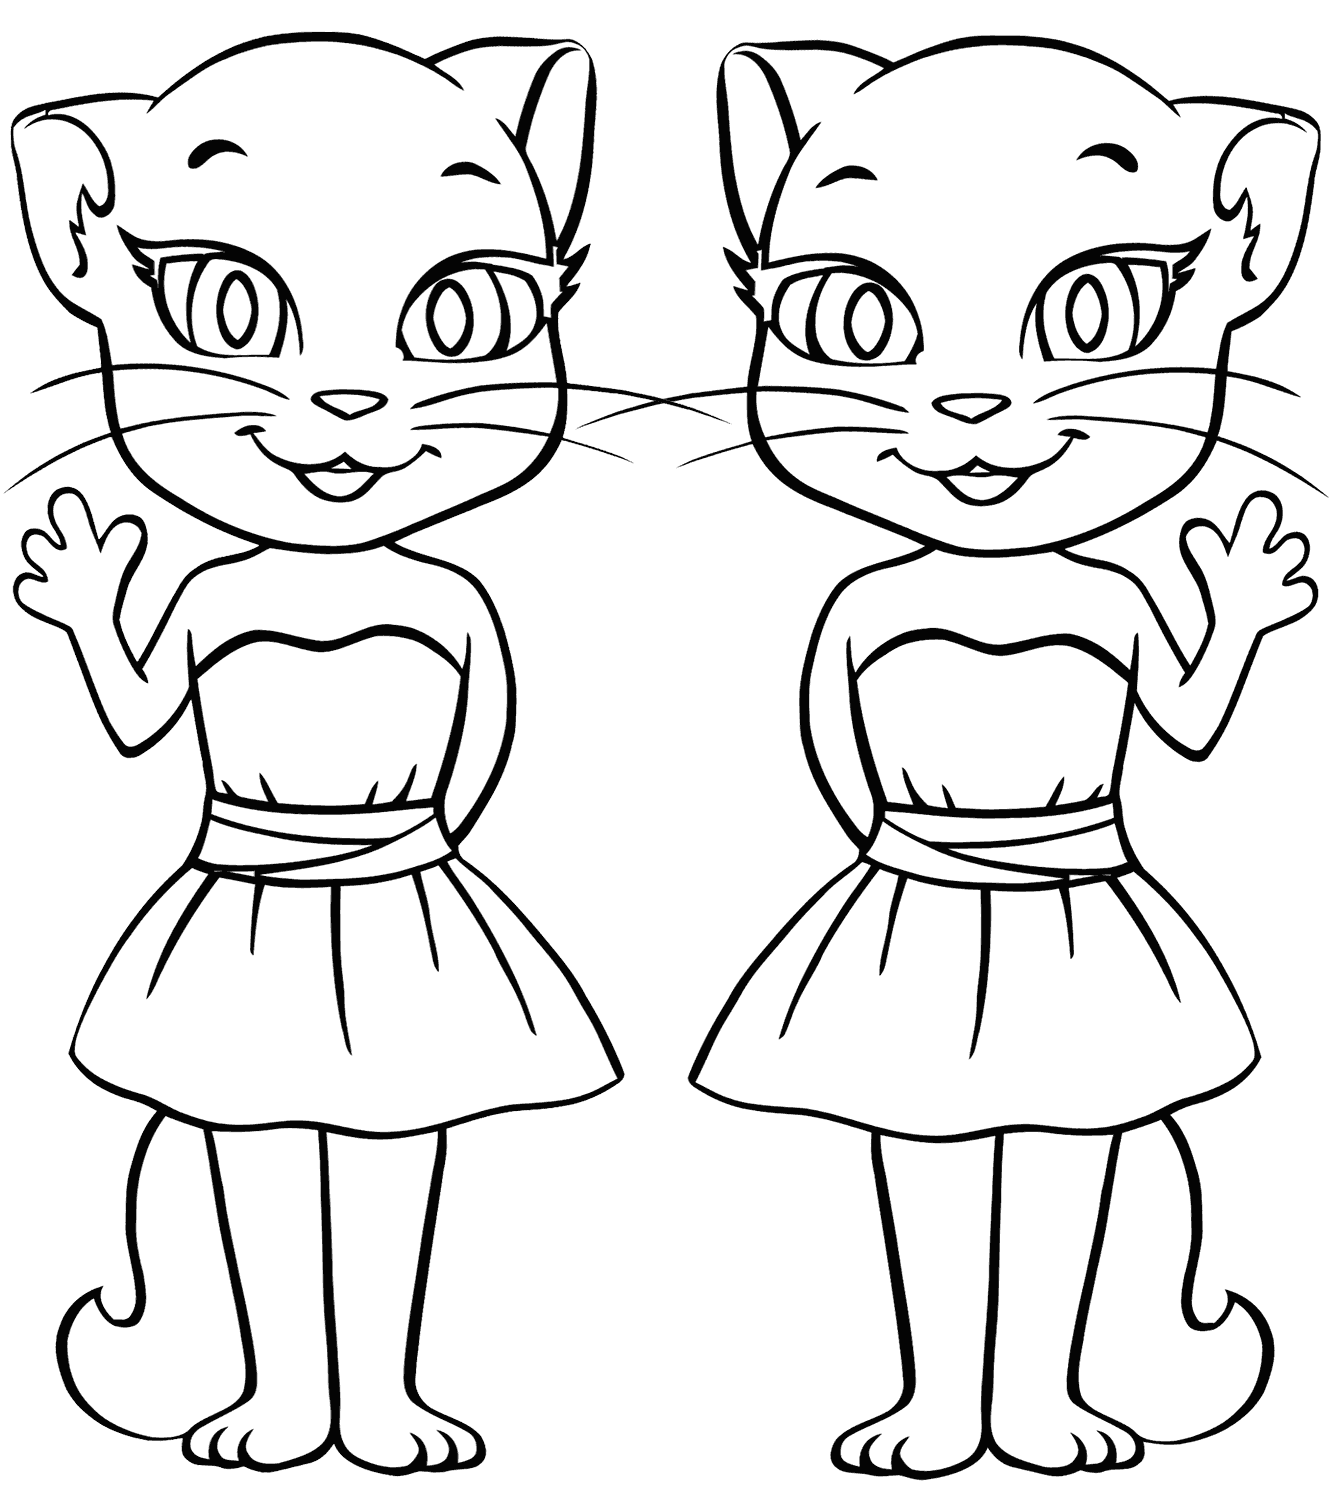 Two Talking Angela Coloring Page - Free Printable Coloring Pages for Kids